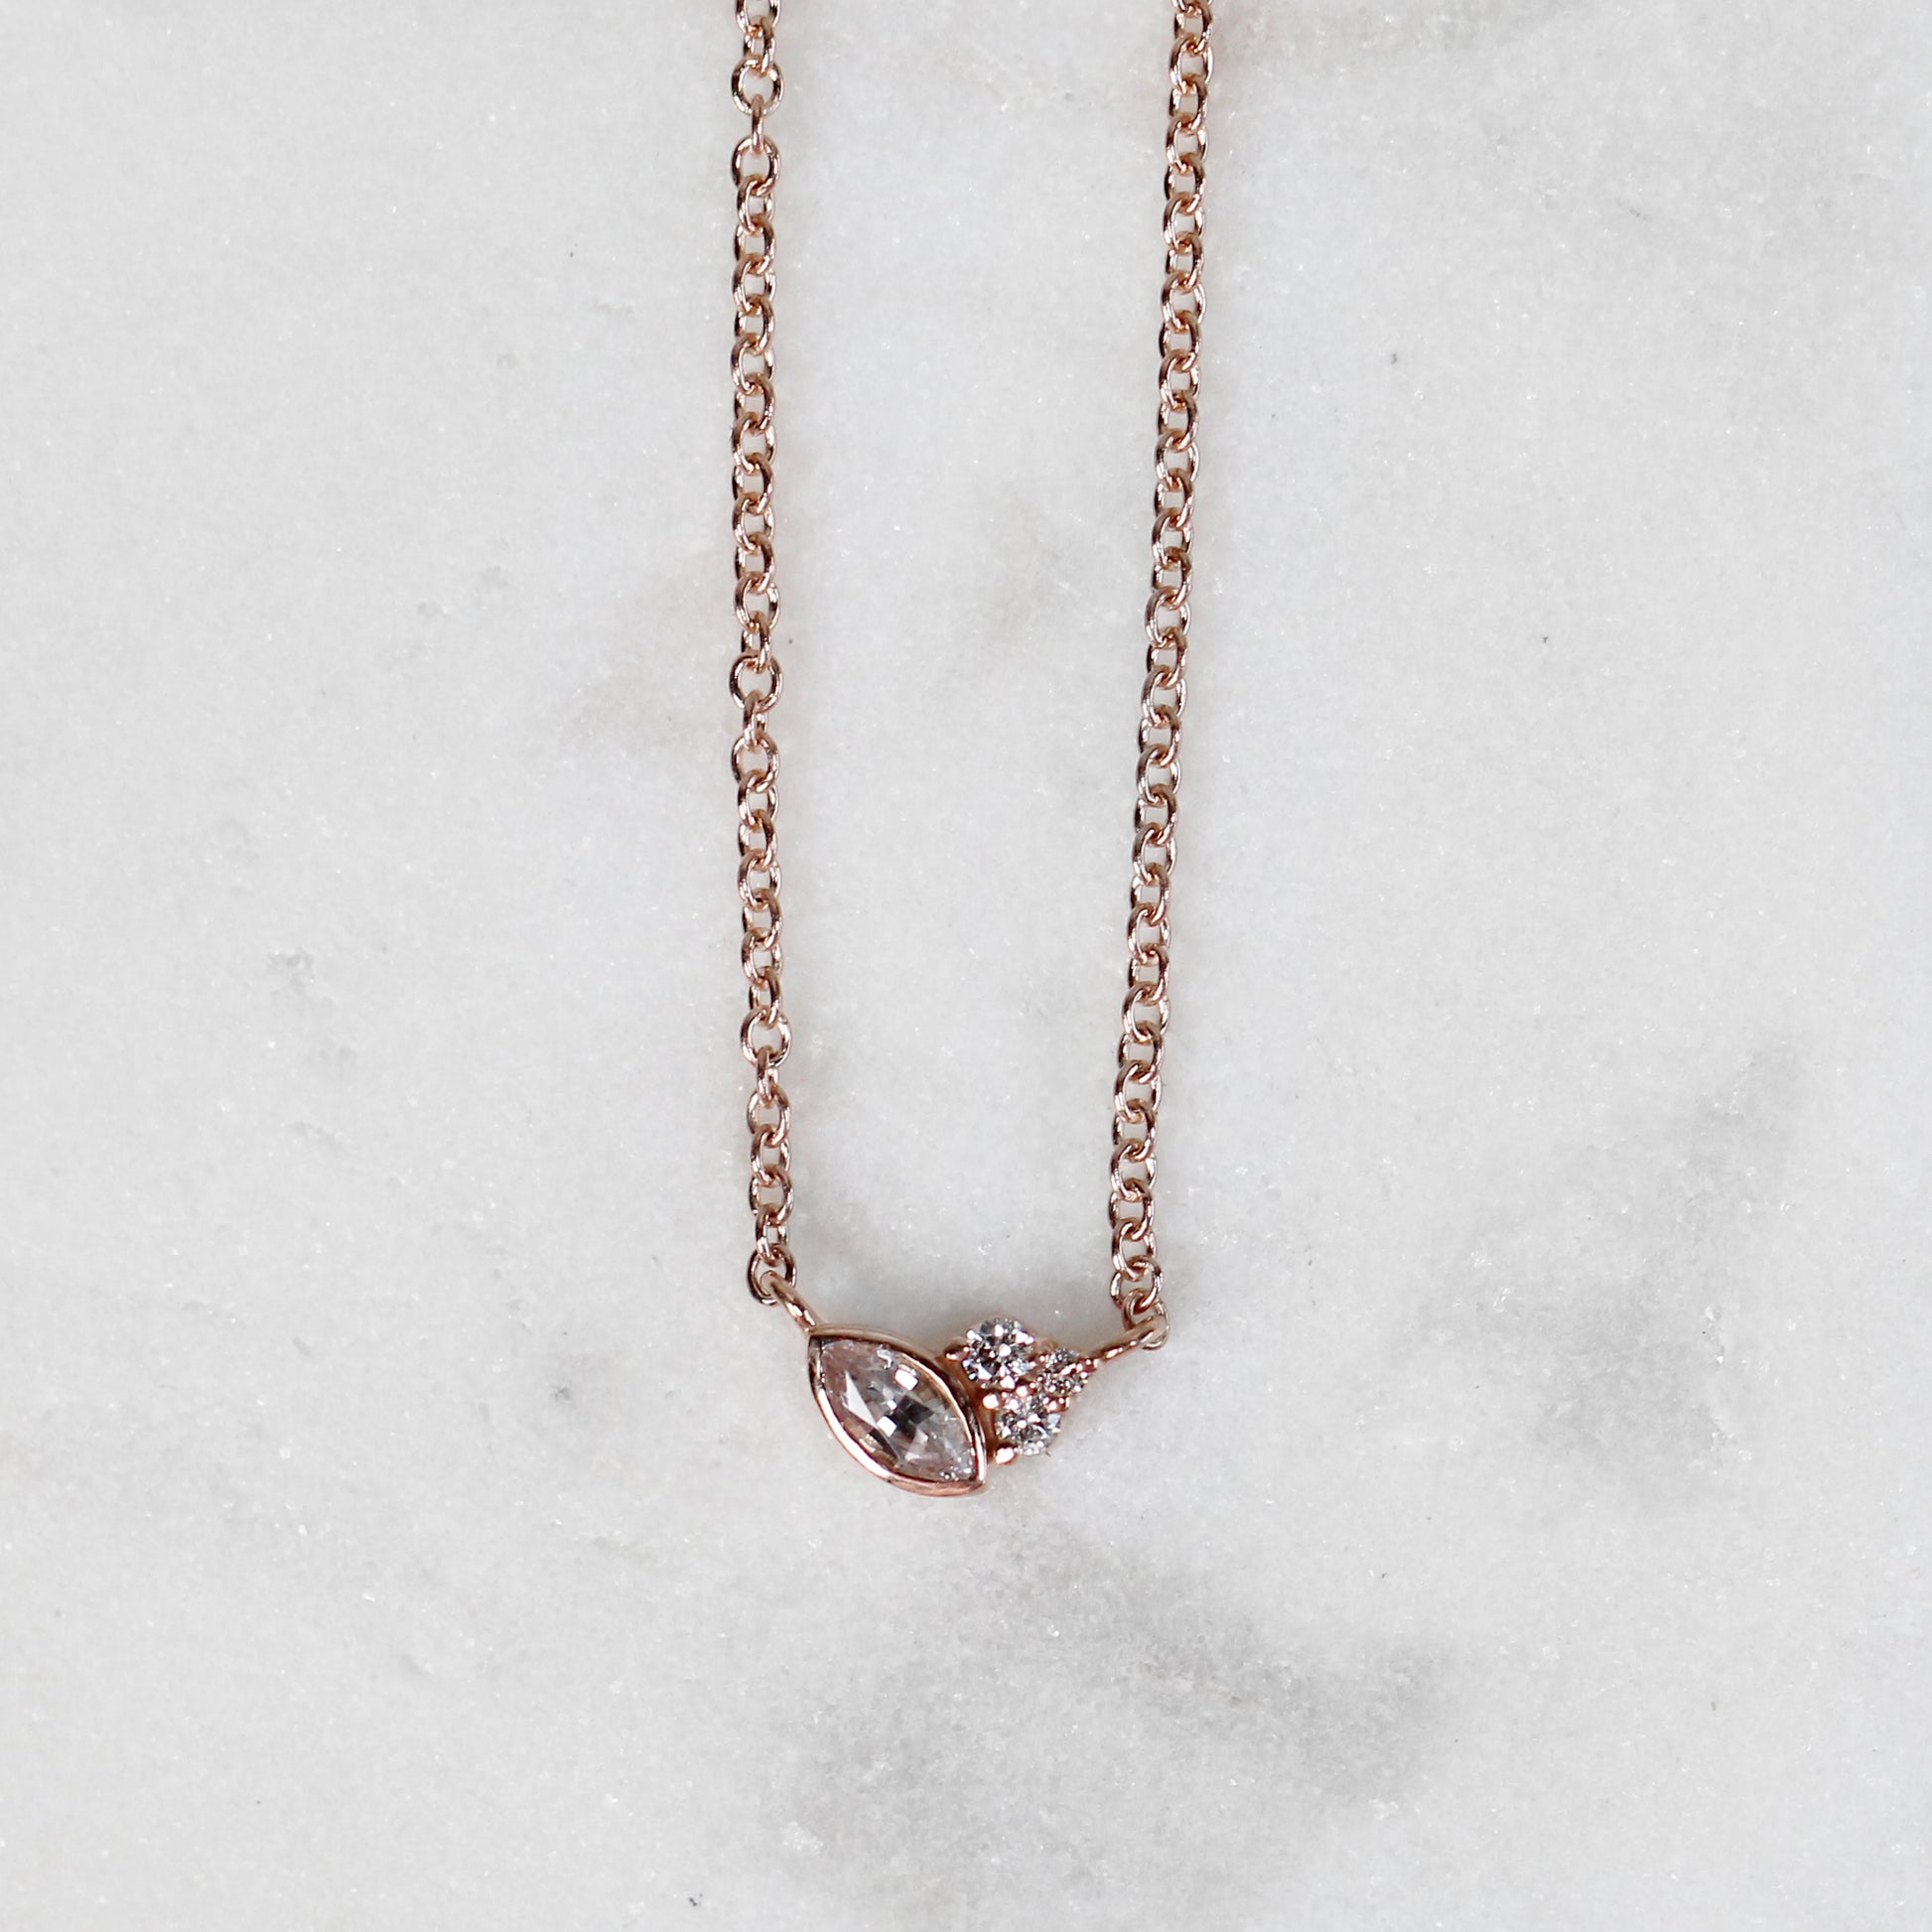 Jordan Necklace - Sapphire and Diamonds- 14k Rose Gold - Midwinter Co. Alternative Bridal Rings and Modern Fine Jewelry